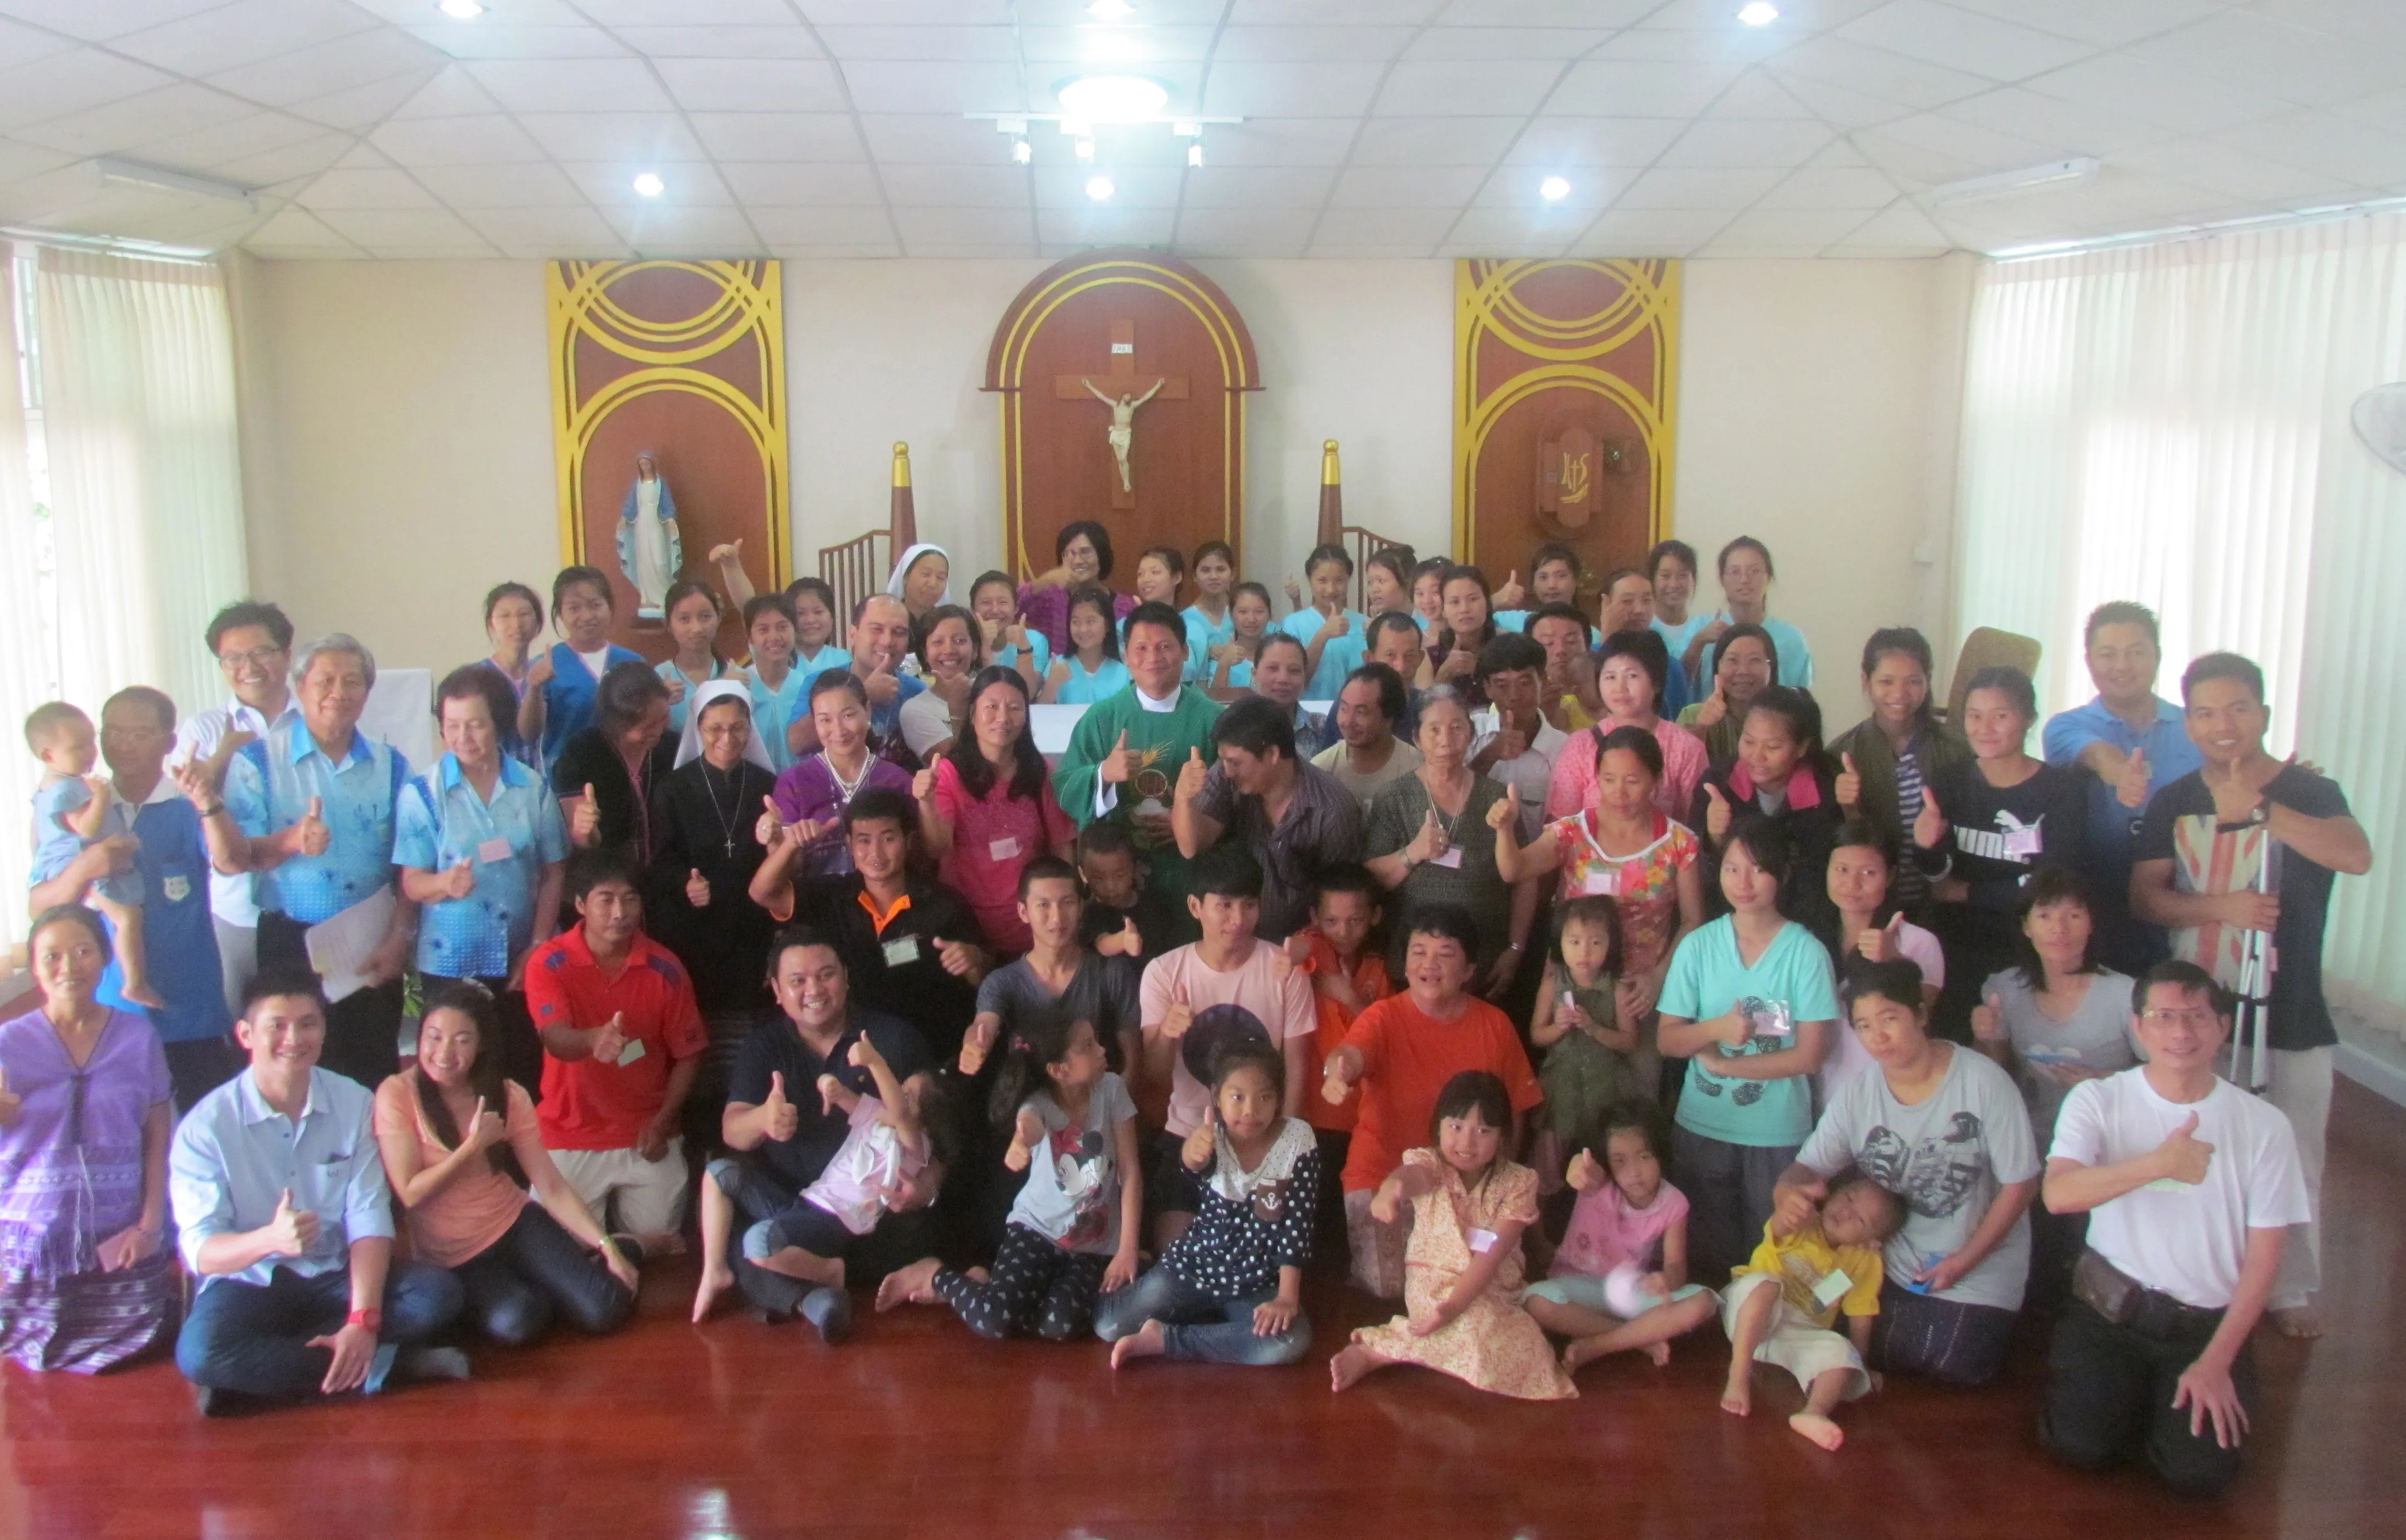 Thai families share in the Gospel experience with the Focolare movement in Chiang Mai, July 26-27, 2014. ?w=200&h=150